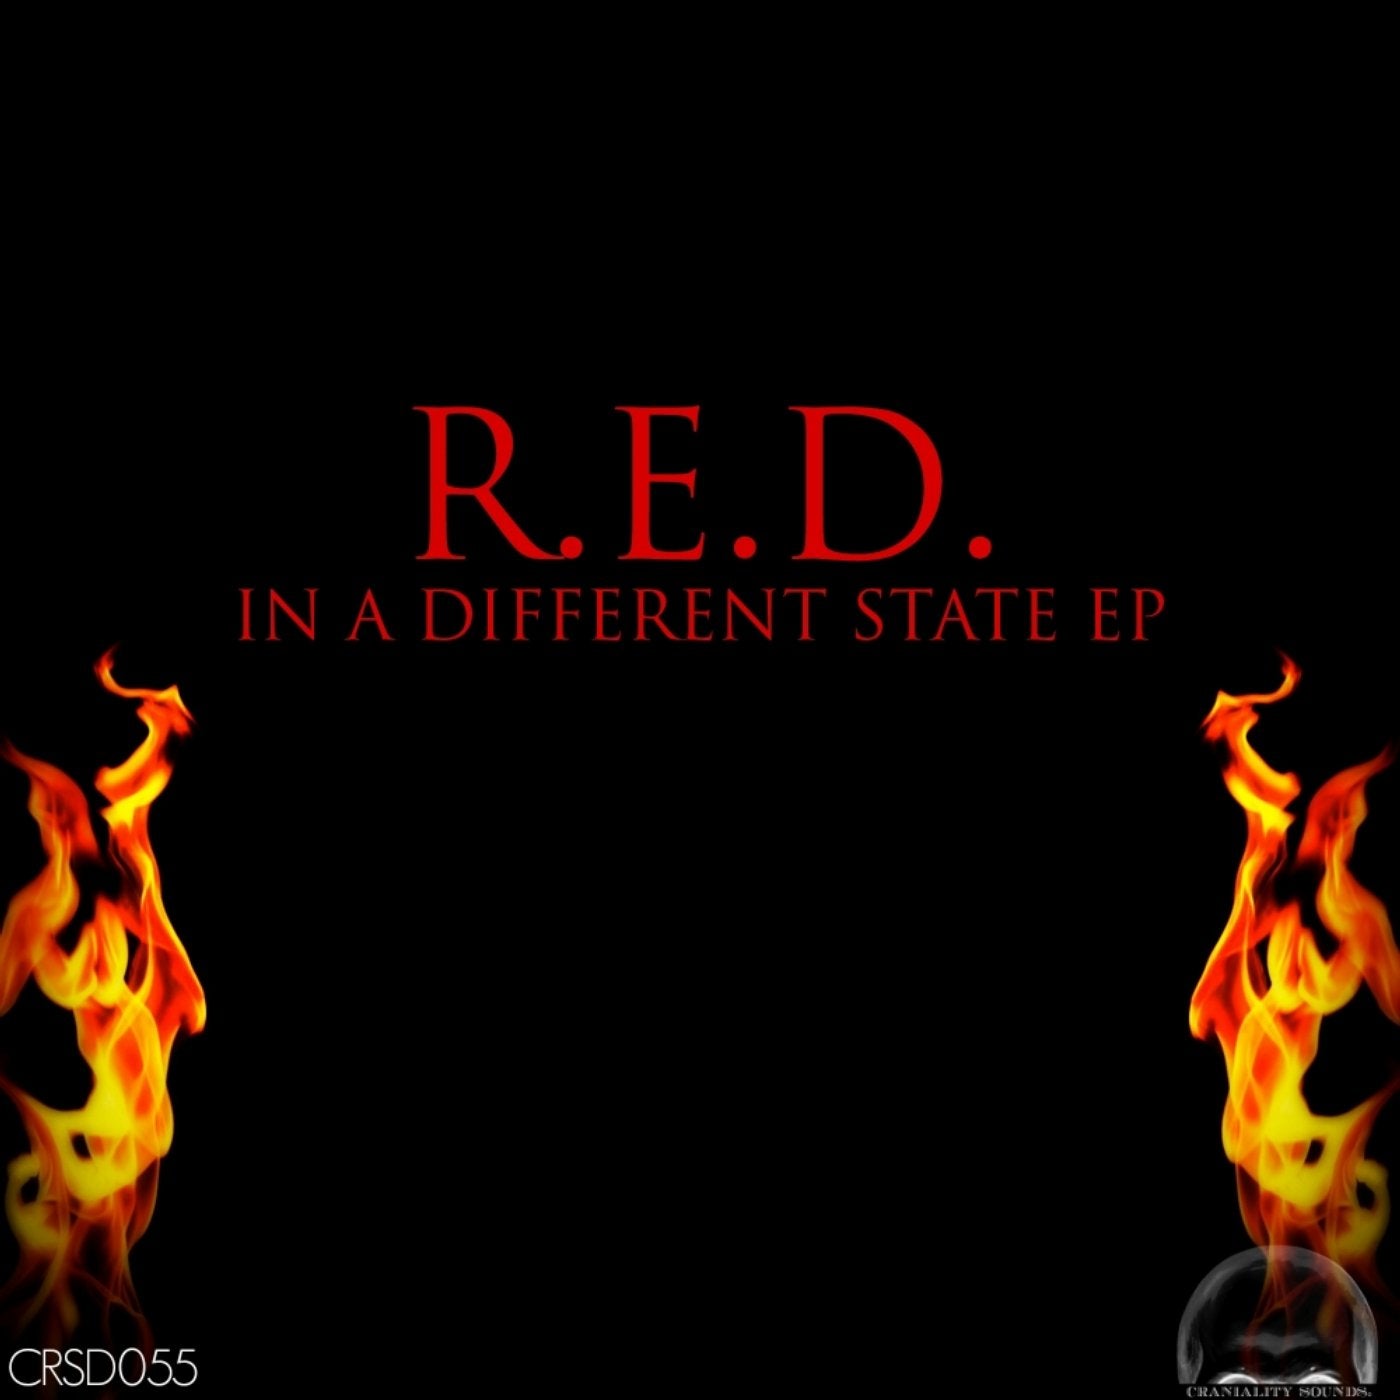 In A Different State EP